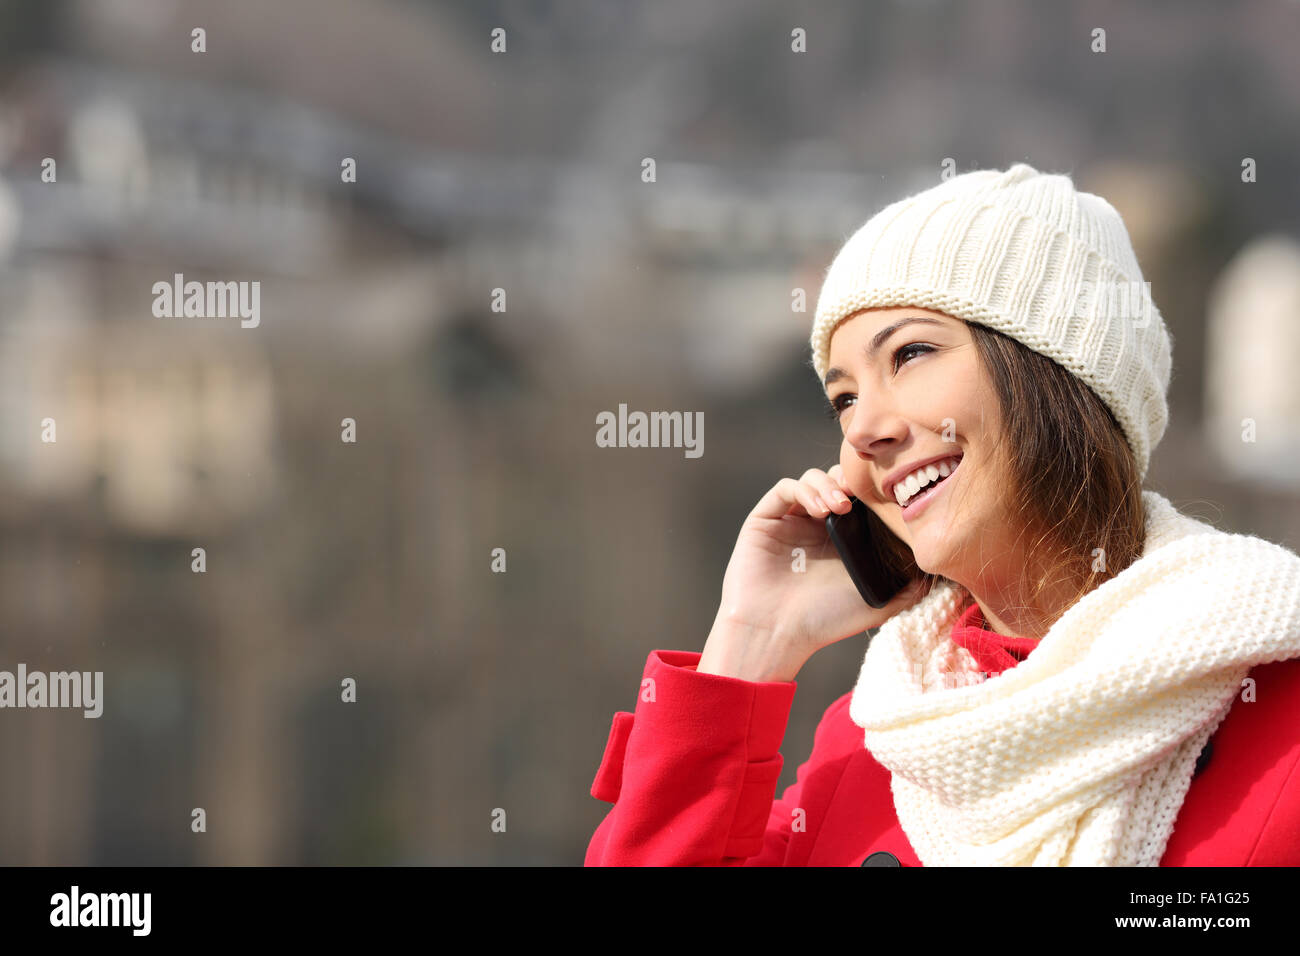 Girl talking on the mobile phone warmly clothed in winter Stock Photo